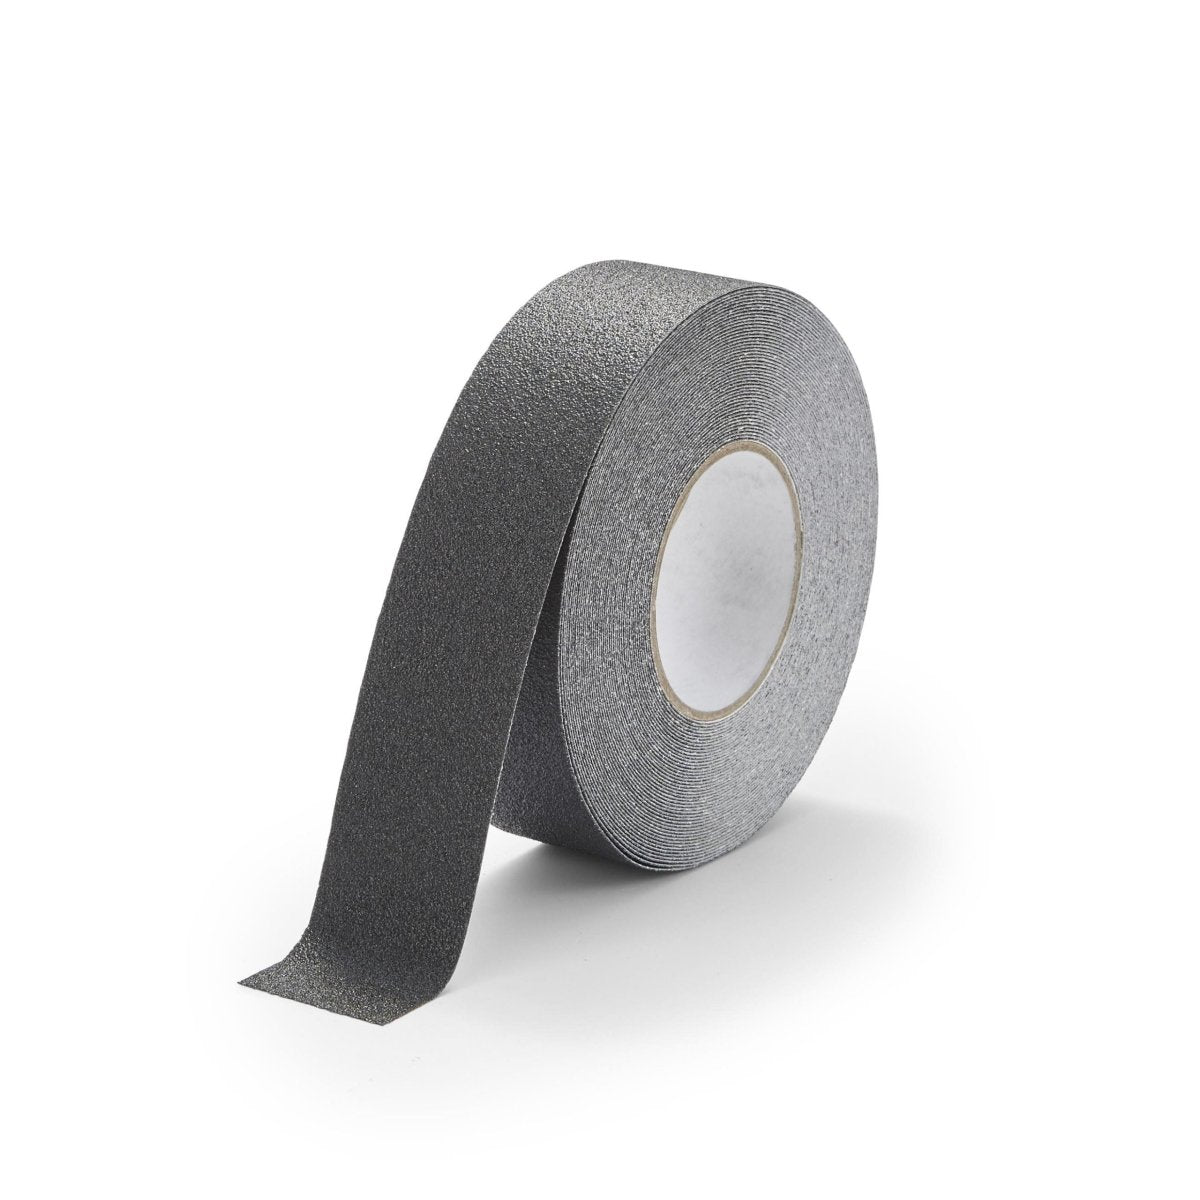 Chemical Resistant Safety-Grip Anti-Slip Tape - Black - Slips Away - H3447N-Black-Chemical-Resistant-Safety-Grip-50mm -